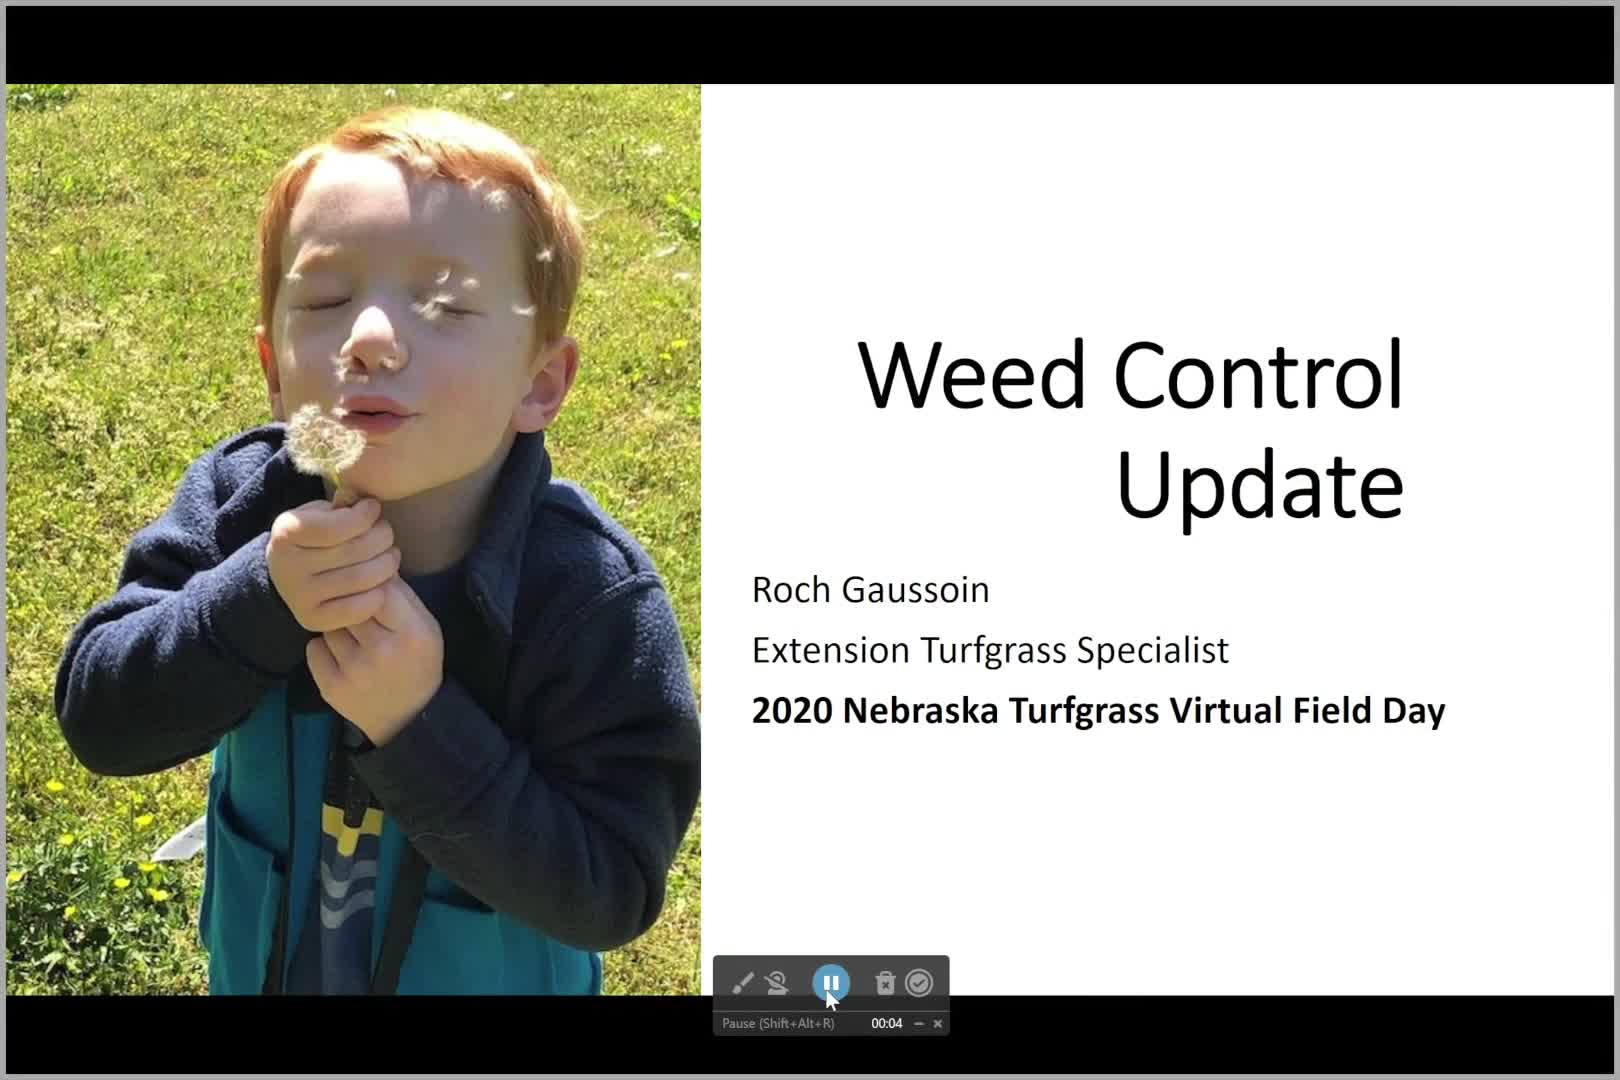 Weed Control Update